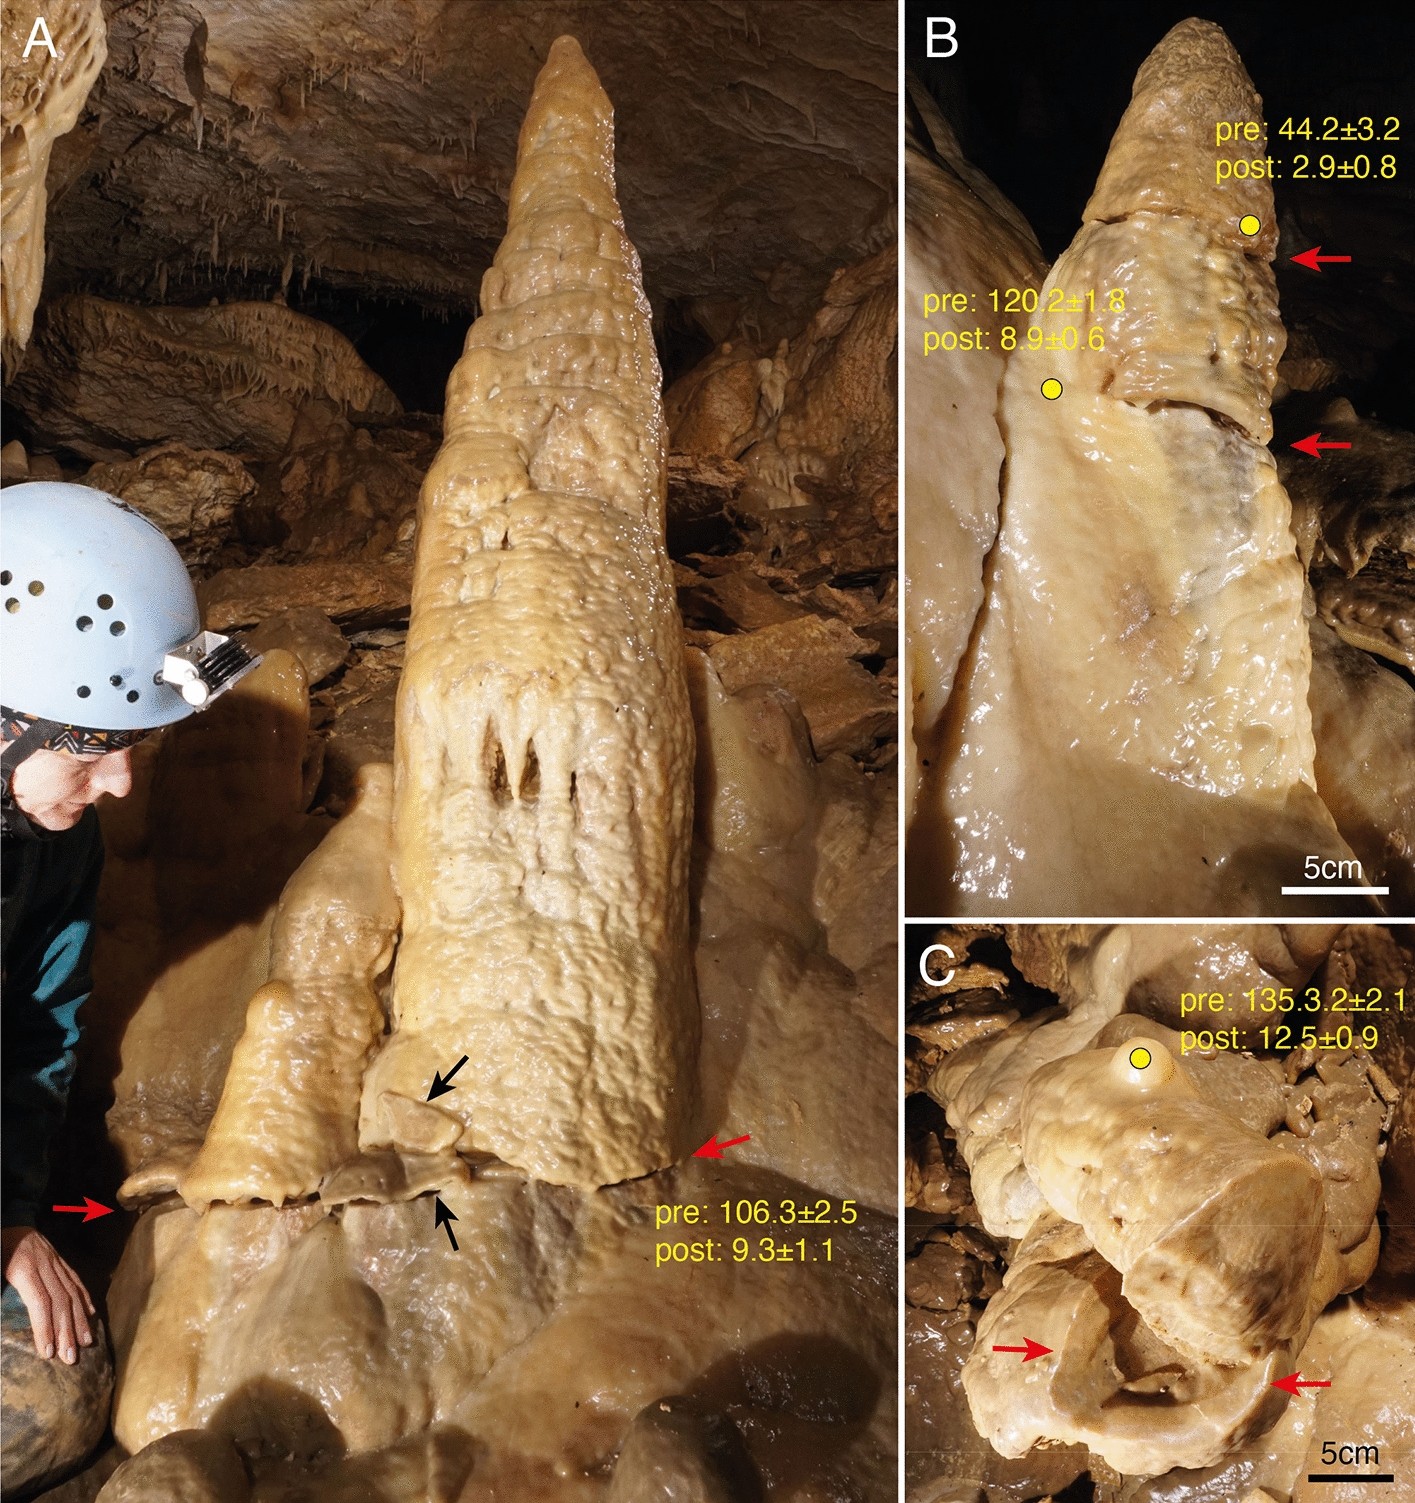 Thermoelasticity of ice explains widespread damage in dripstone caves  during glacial periods | Scientific Reports